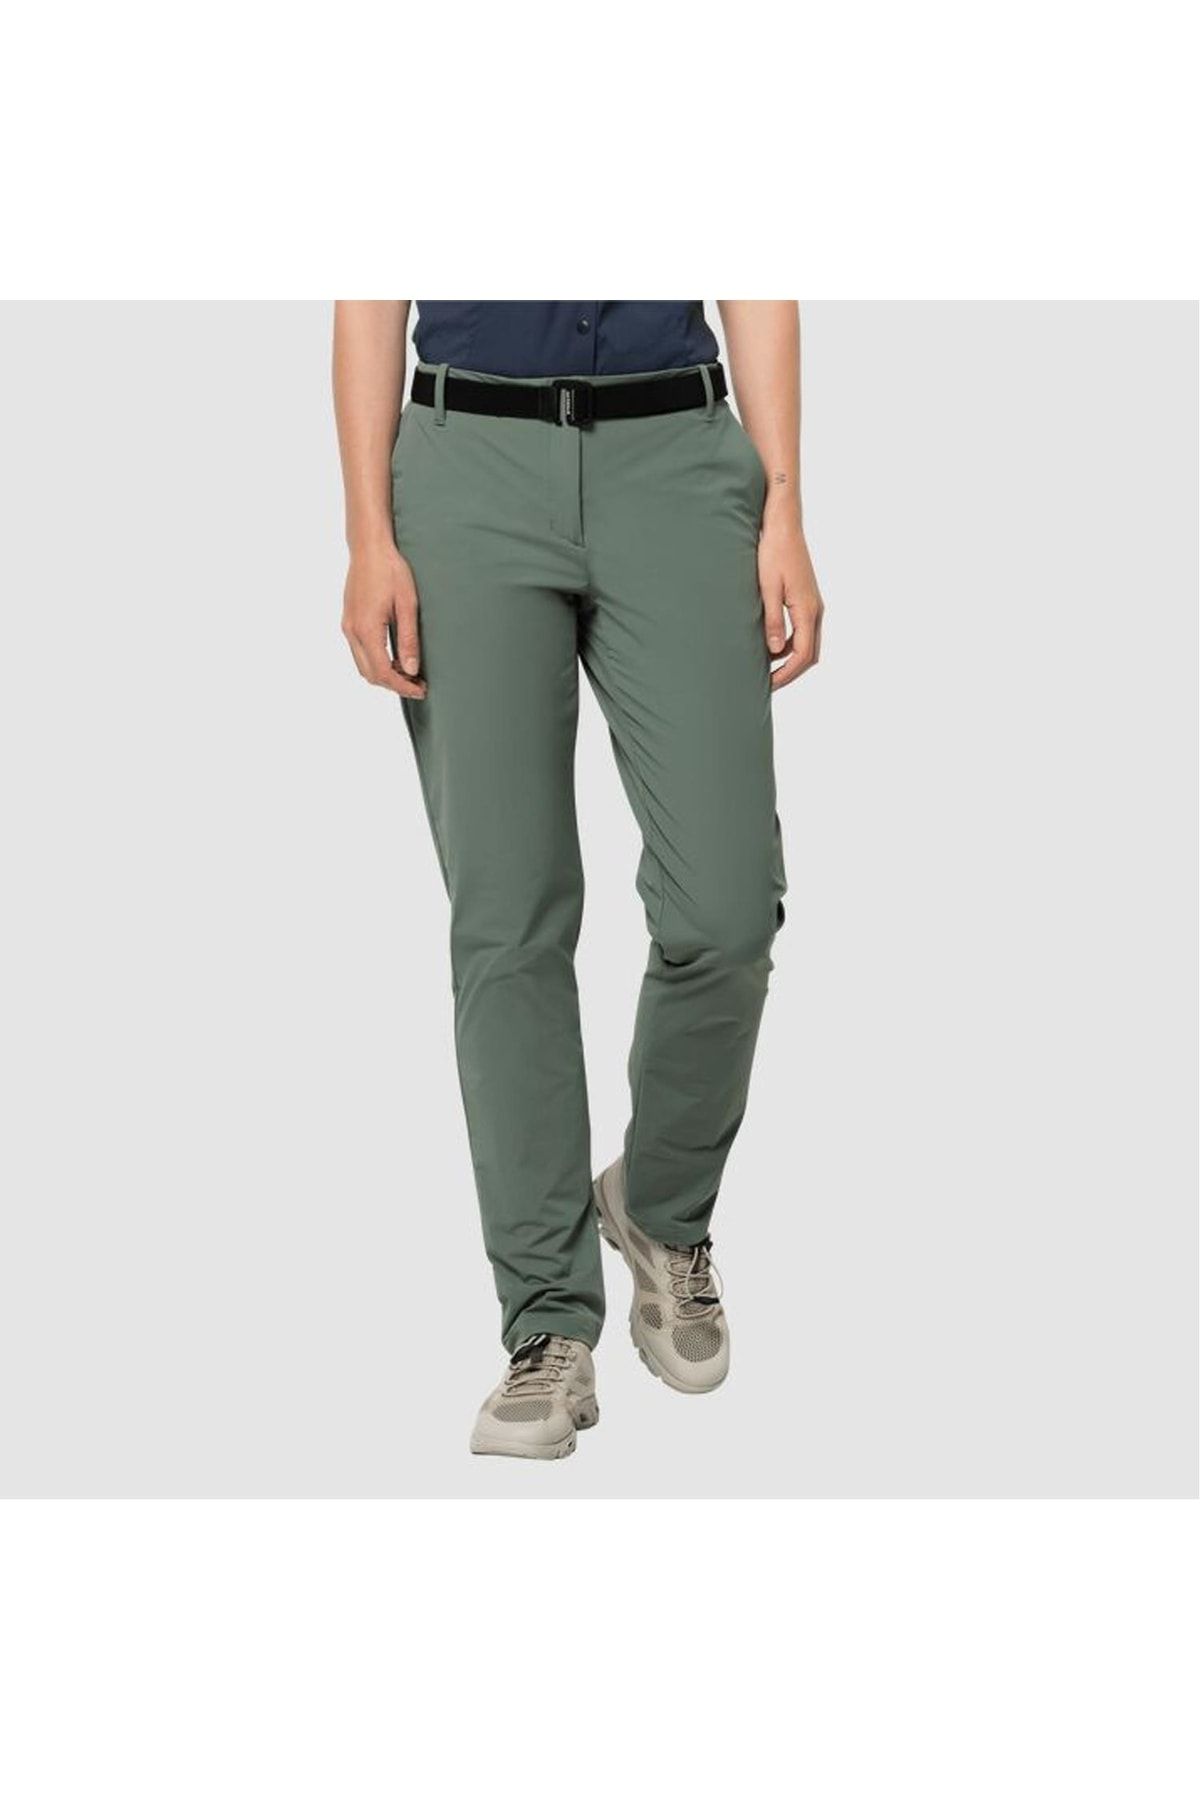 Jack Wolfskin Pack & Go Pant W